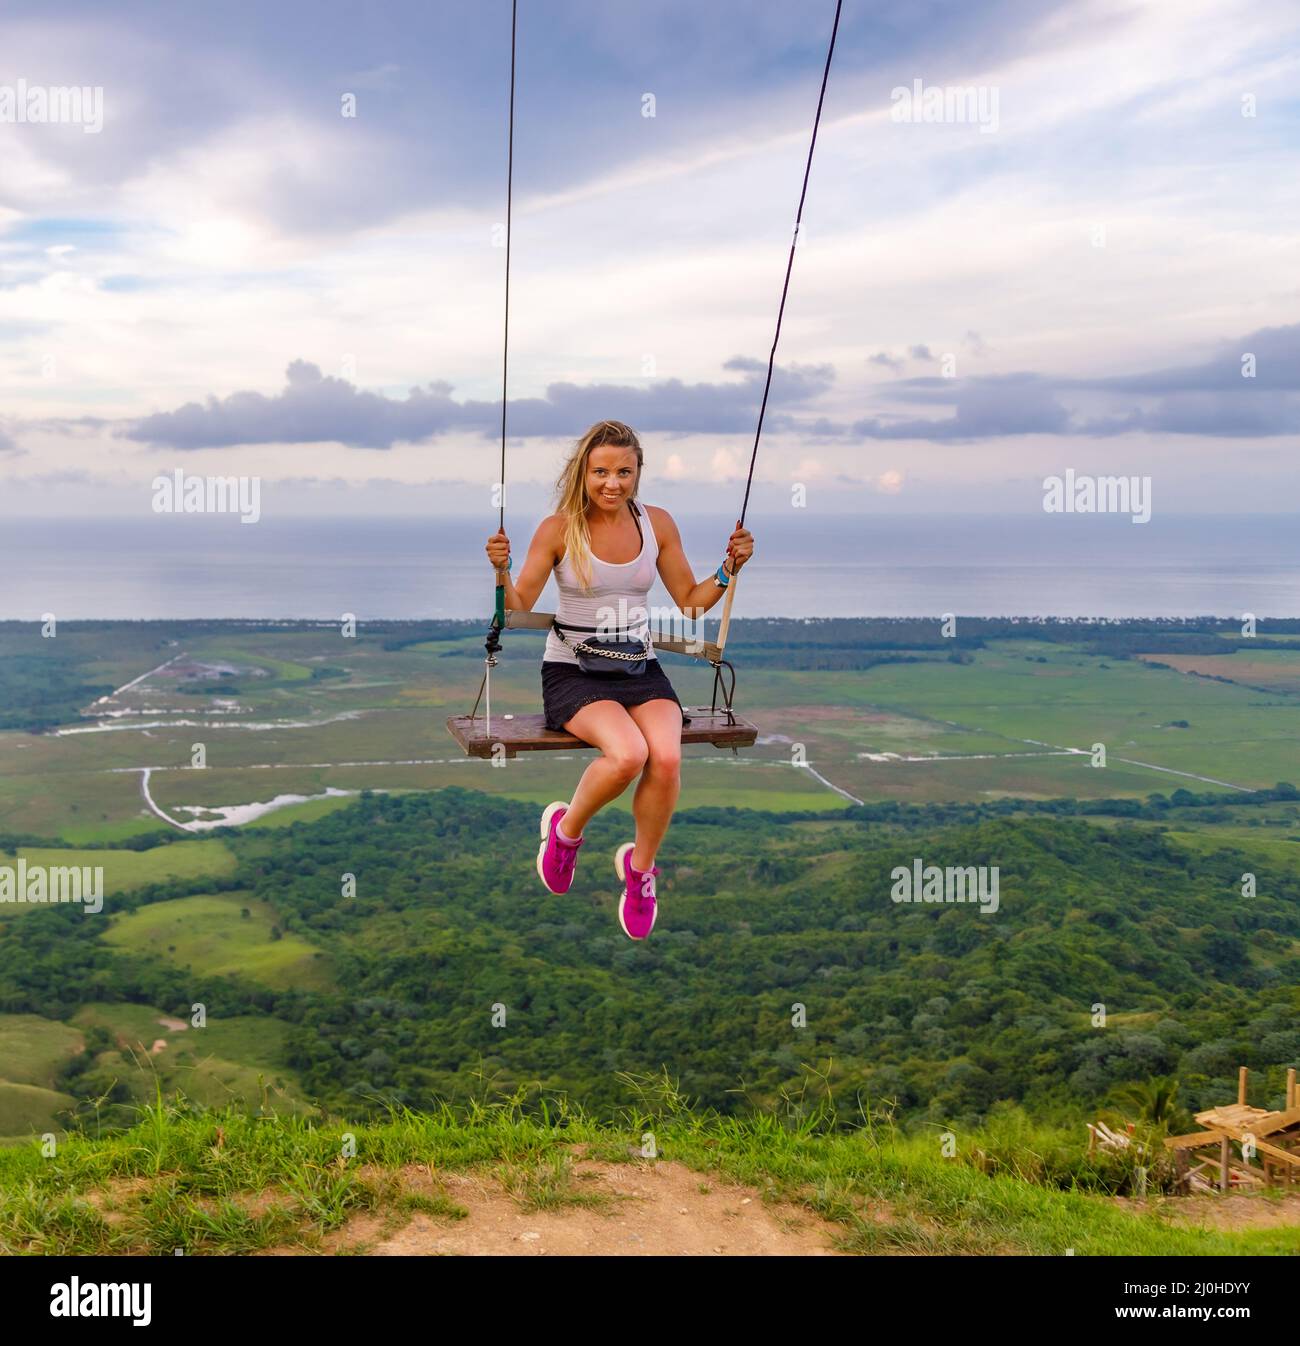 A woman swings on a swing on a high mountain in the Dominican Republic. Tourist place Stock Photo